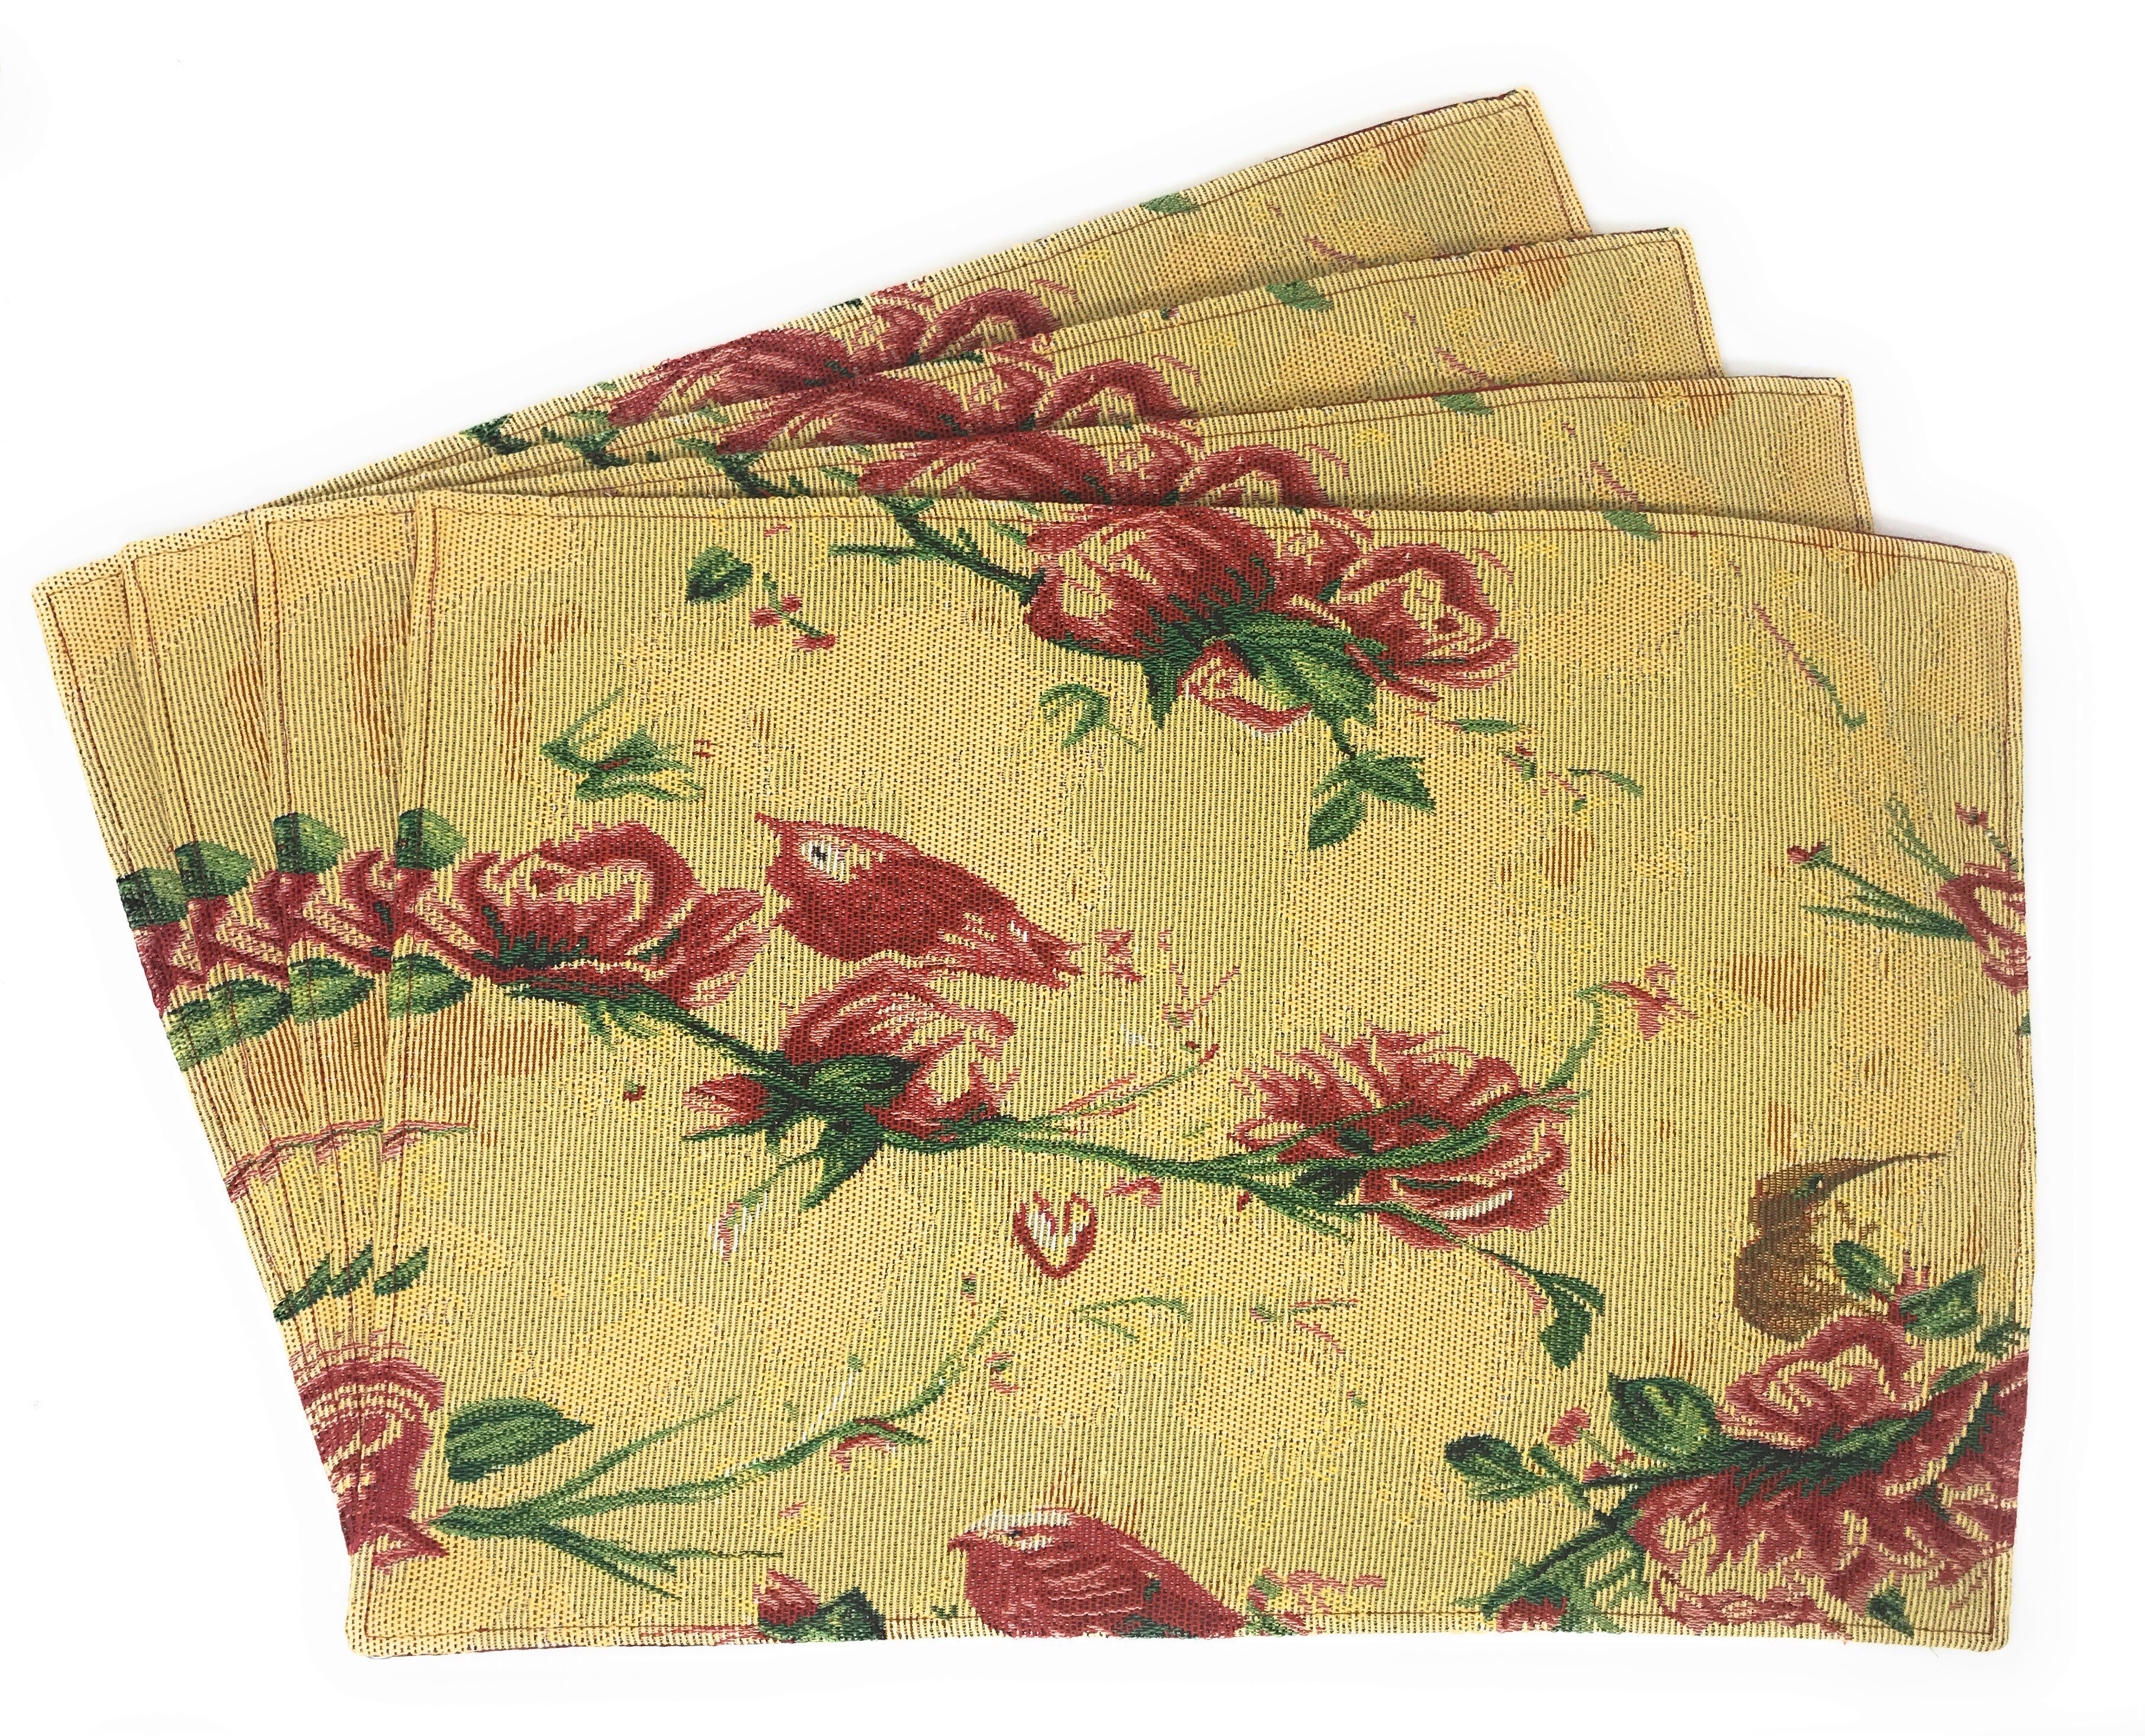 Tache Floral Red Roses Hummingbirds Golden Woven Tapestry Placemat Set (18115) - Tache Home Fashion